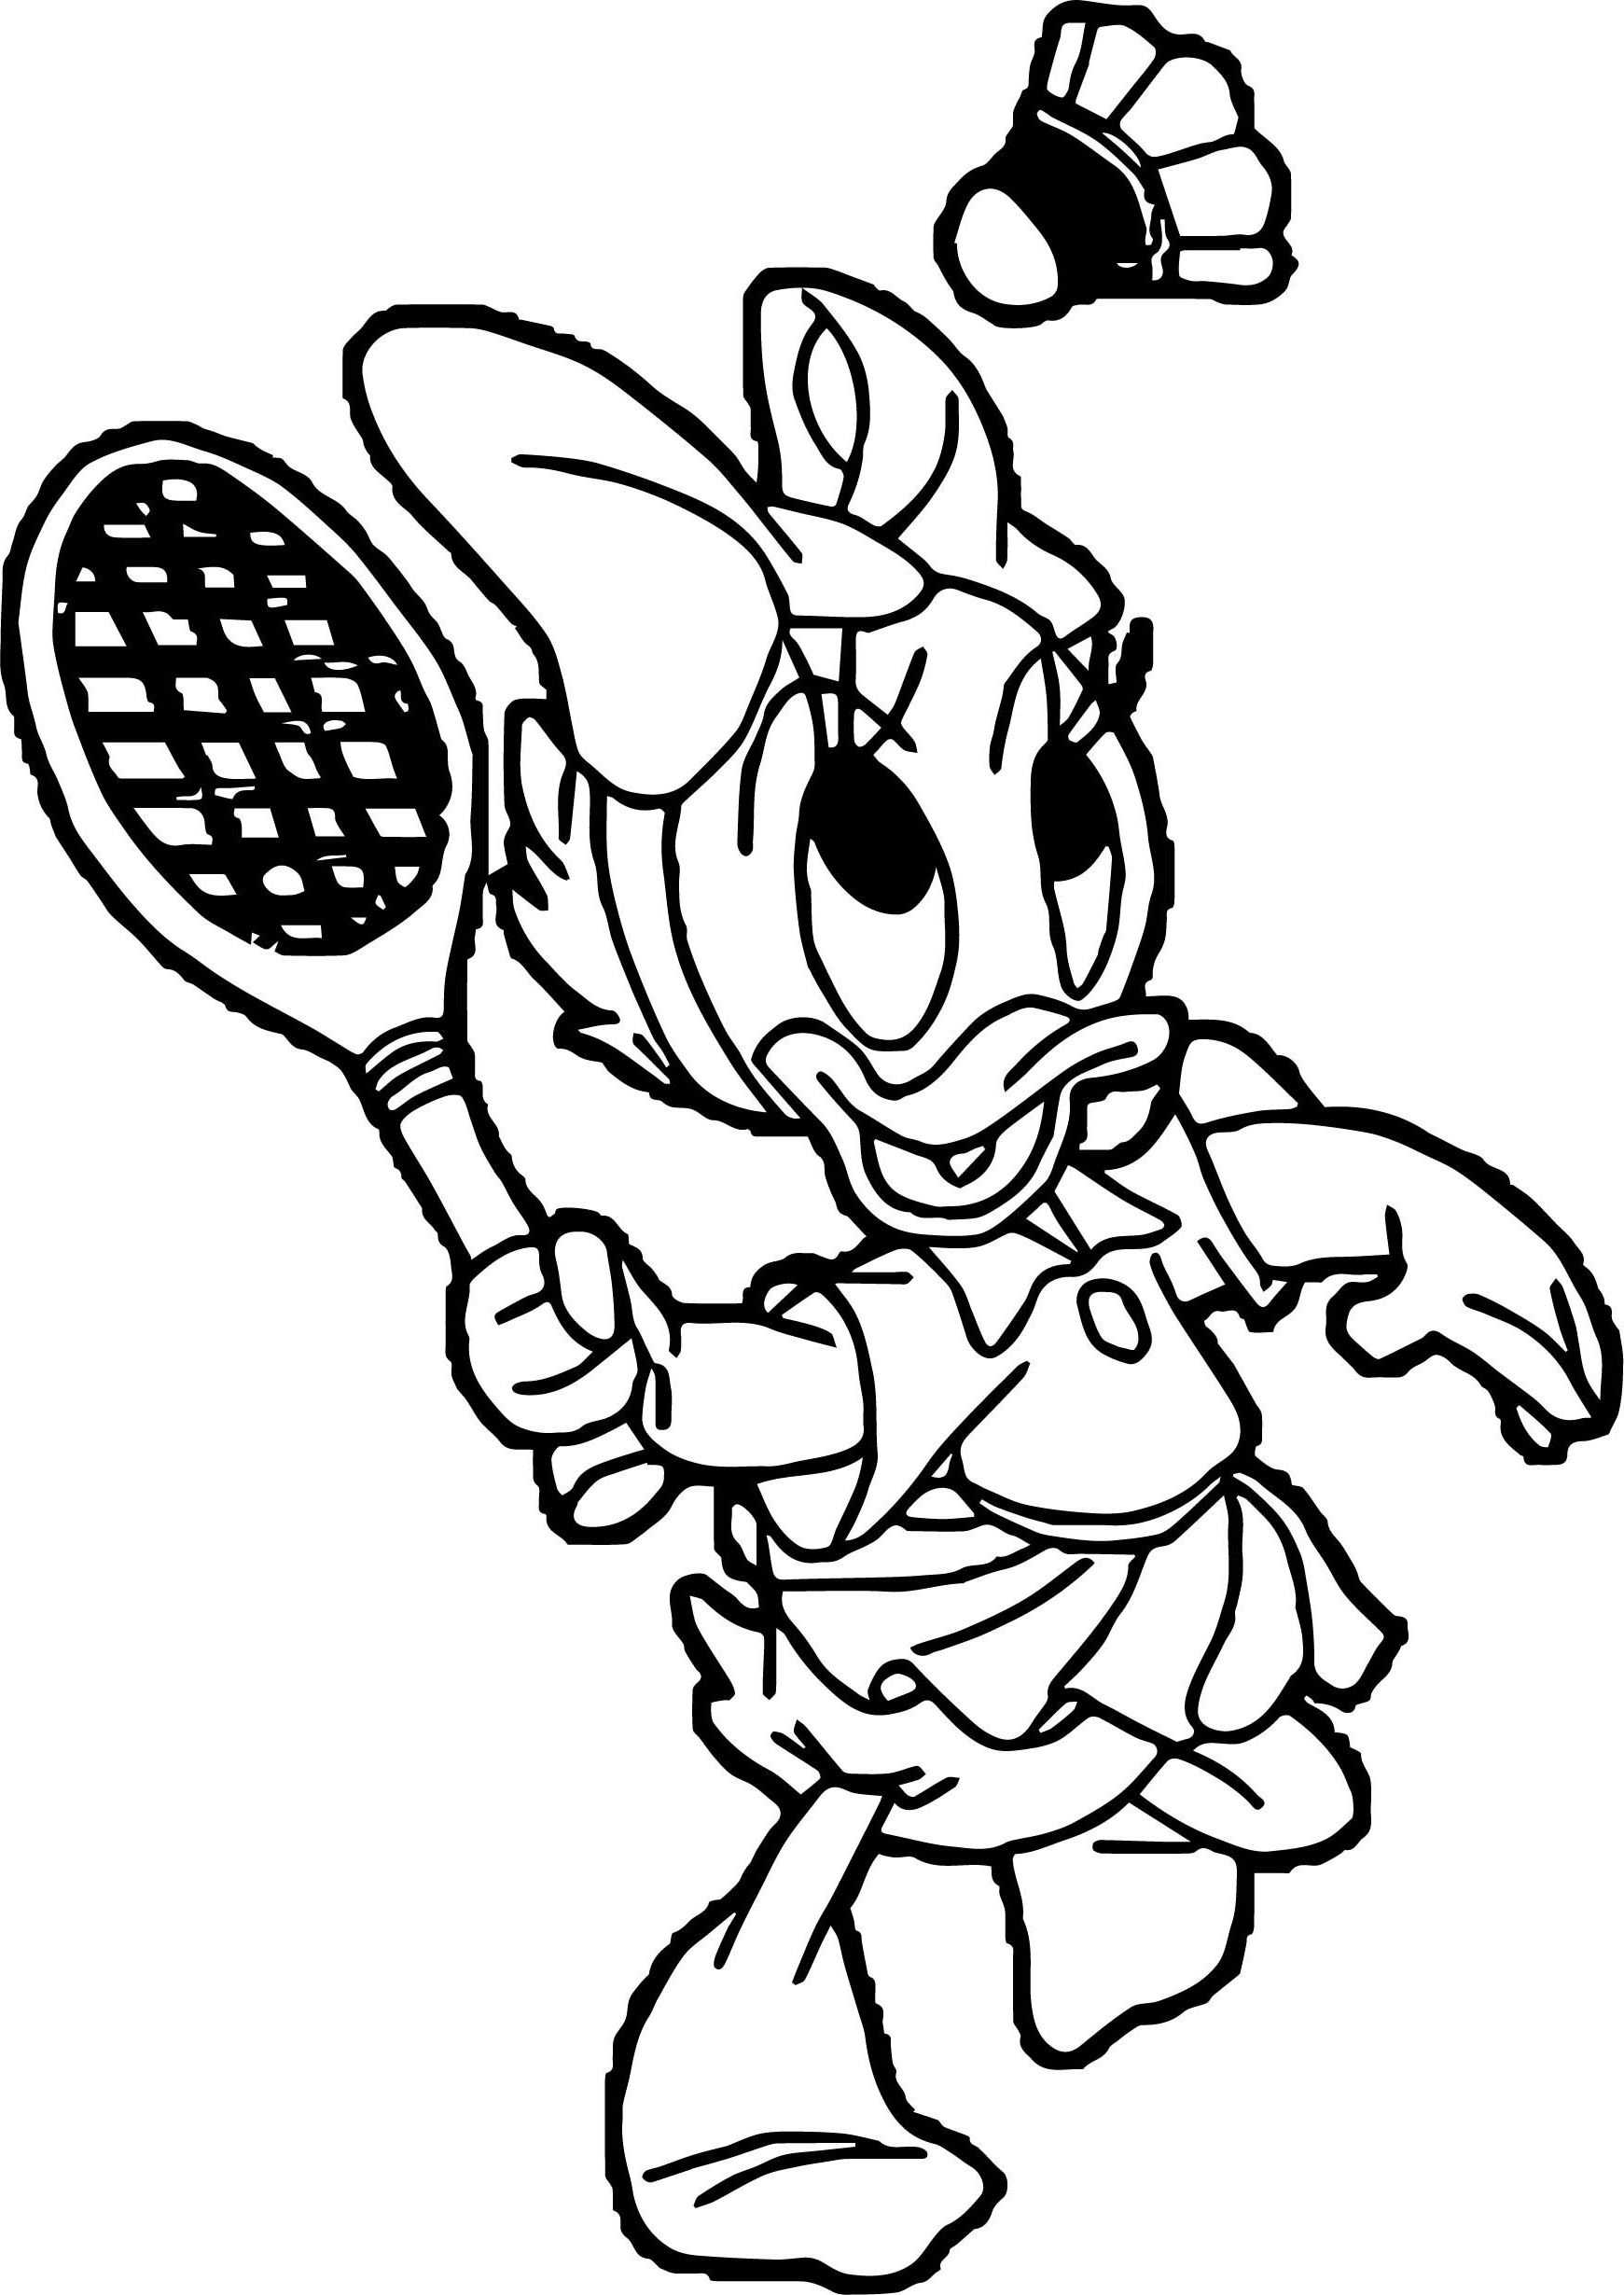 Badminton Coloring Pages - Best Coloring Pages For Kids